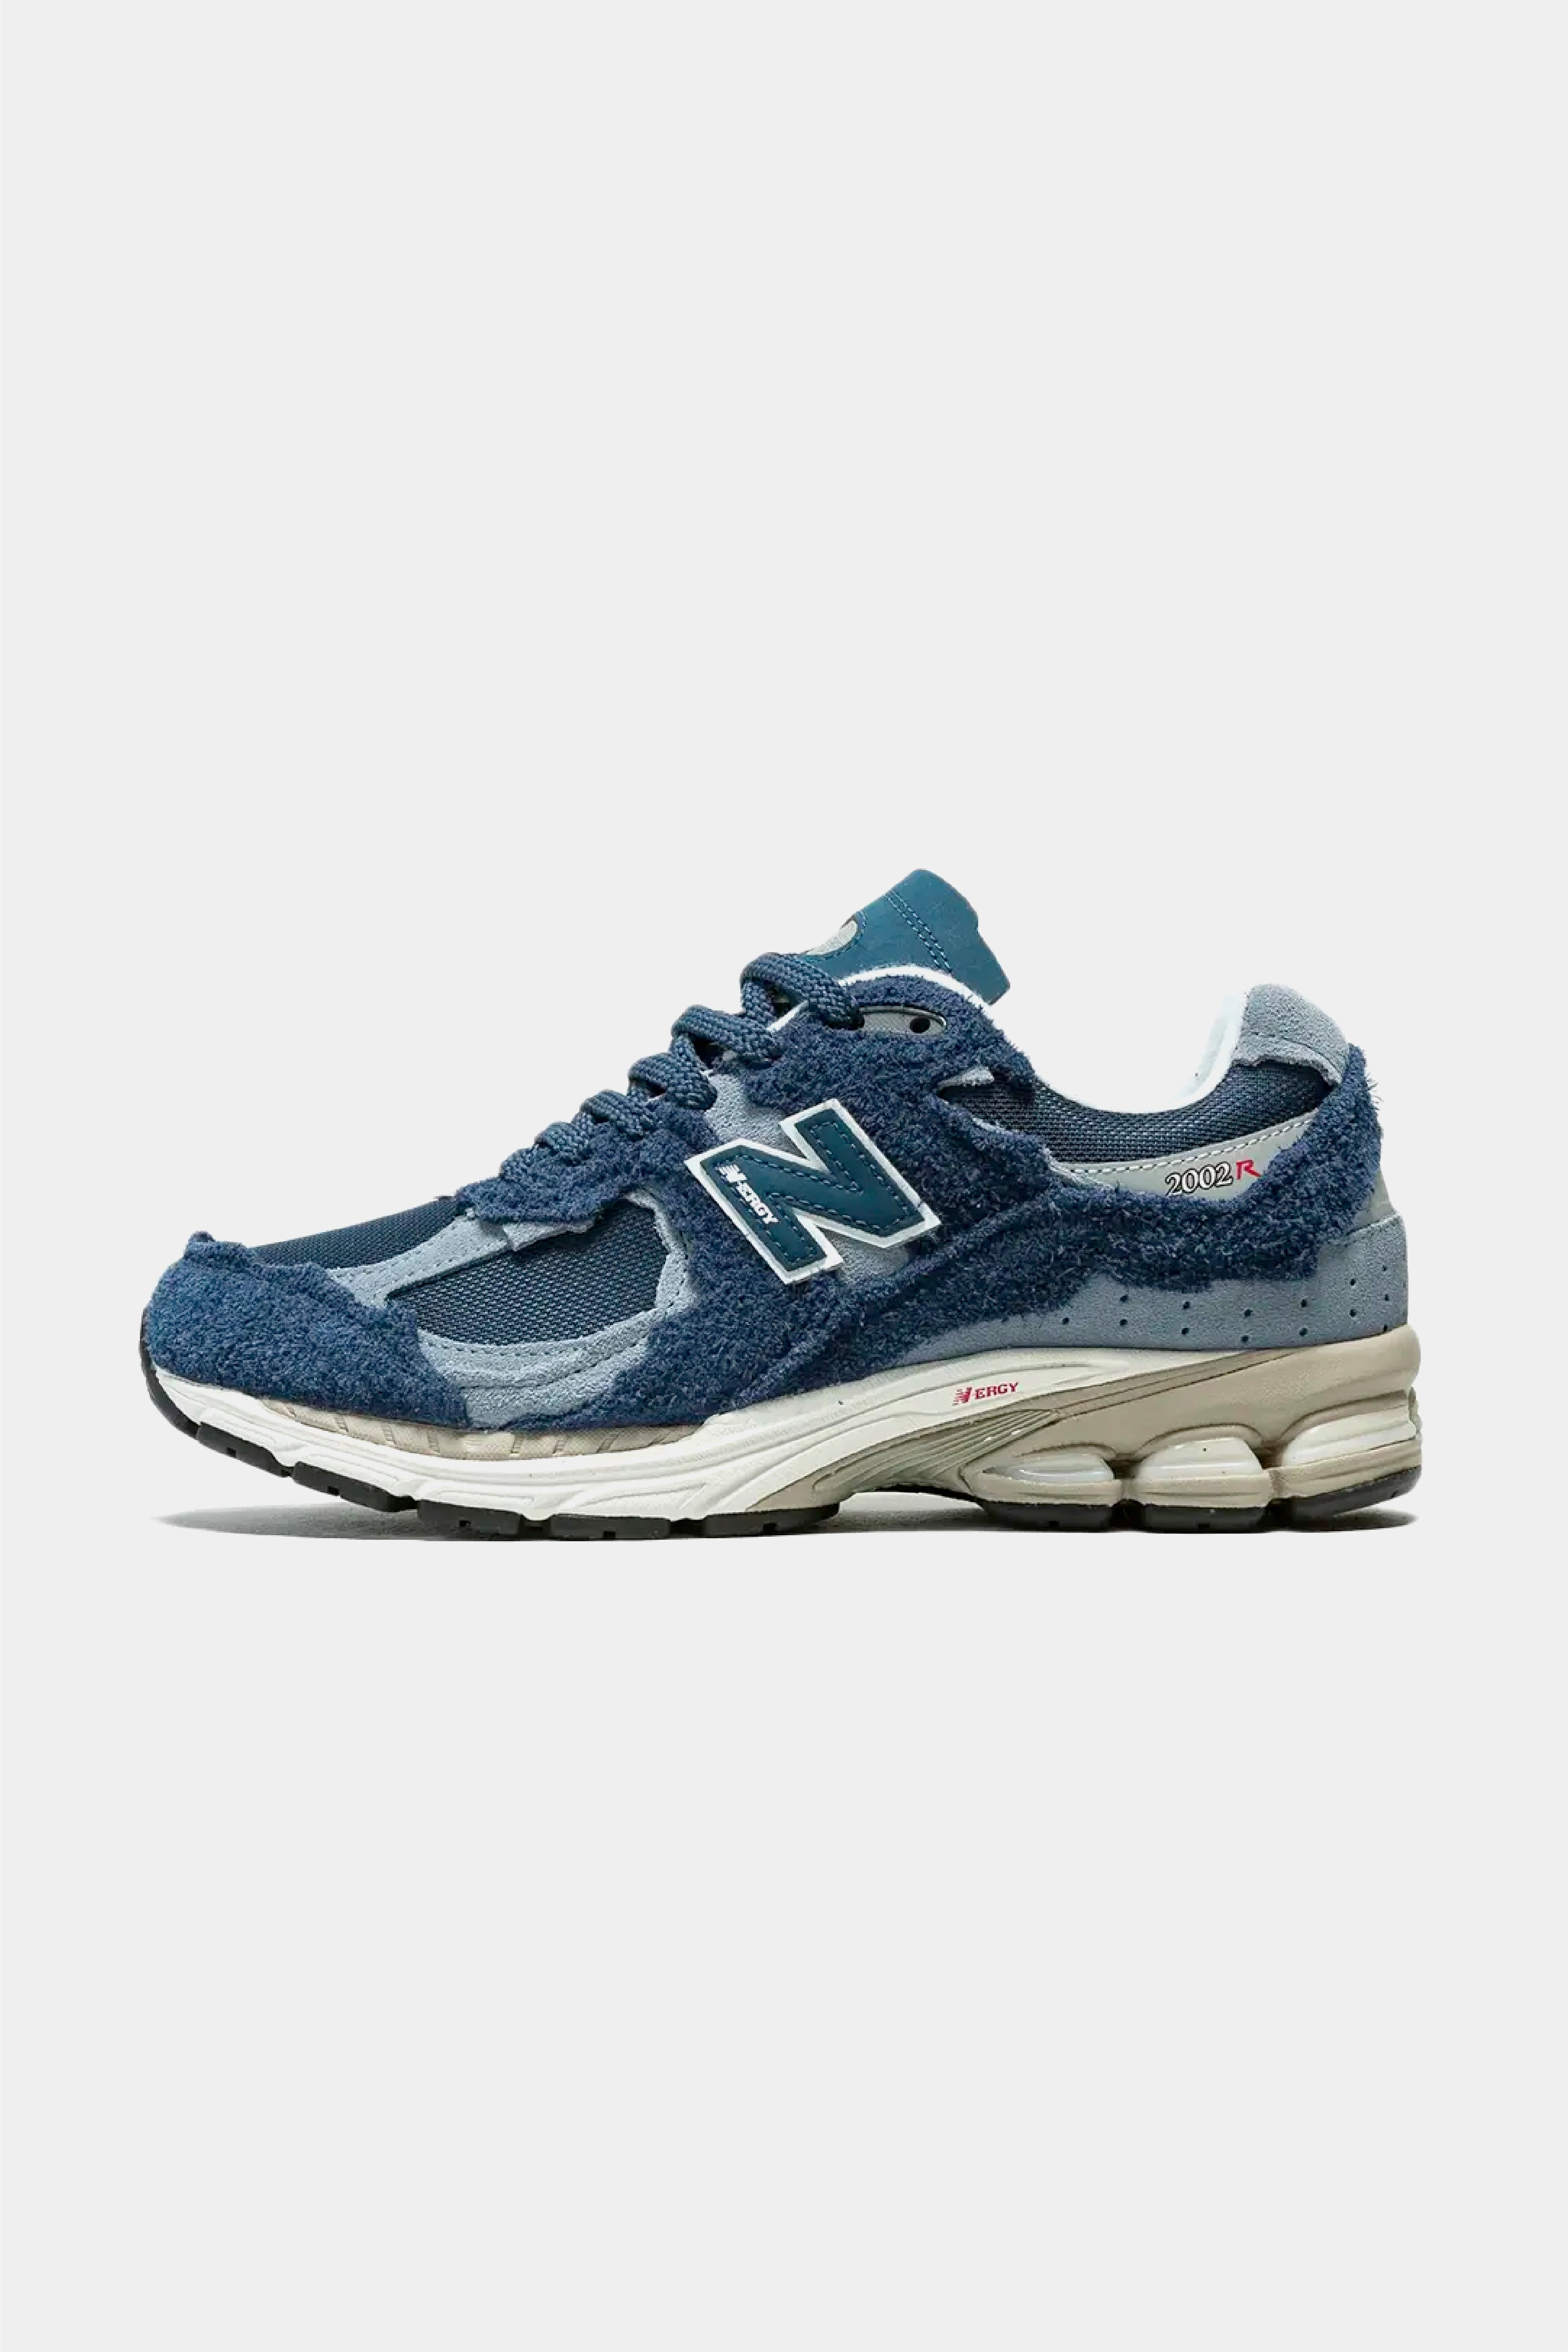 Selectshop FRAME - NEW BALANCE 2002R "Protection Pack Navy Grey" Footwear Concept Store Dubai